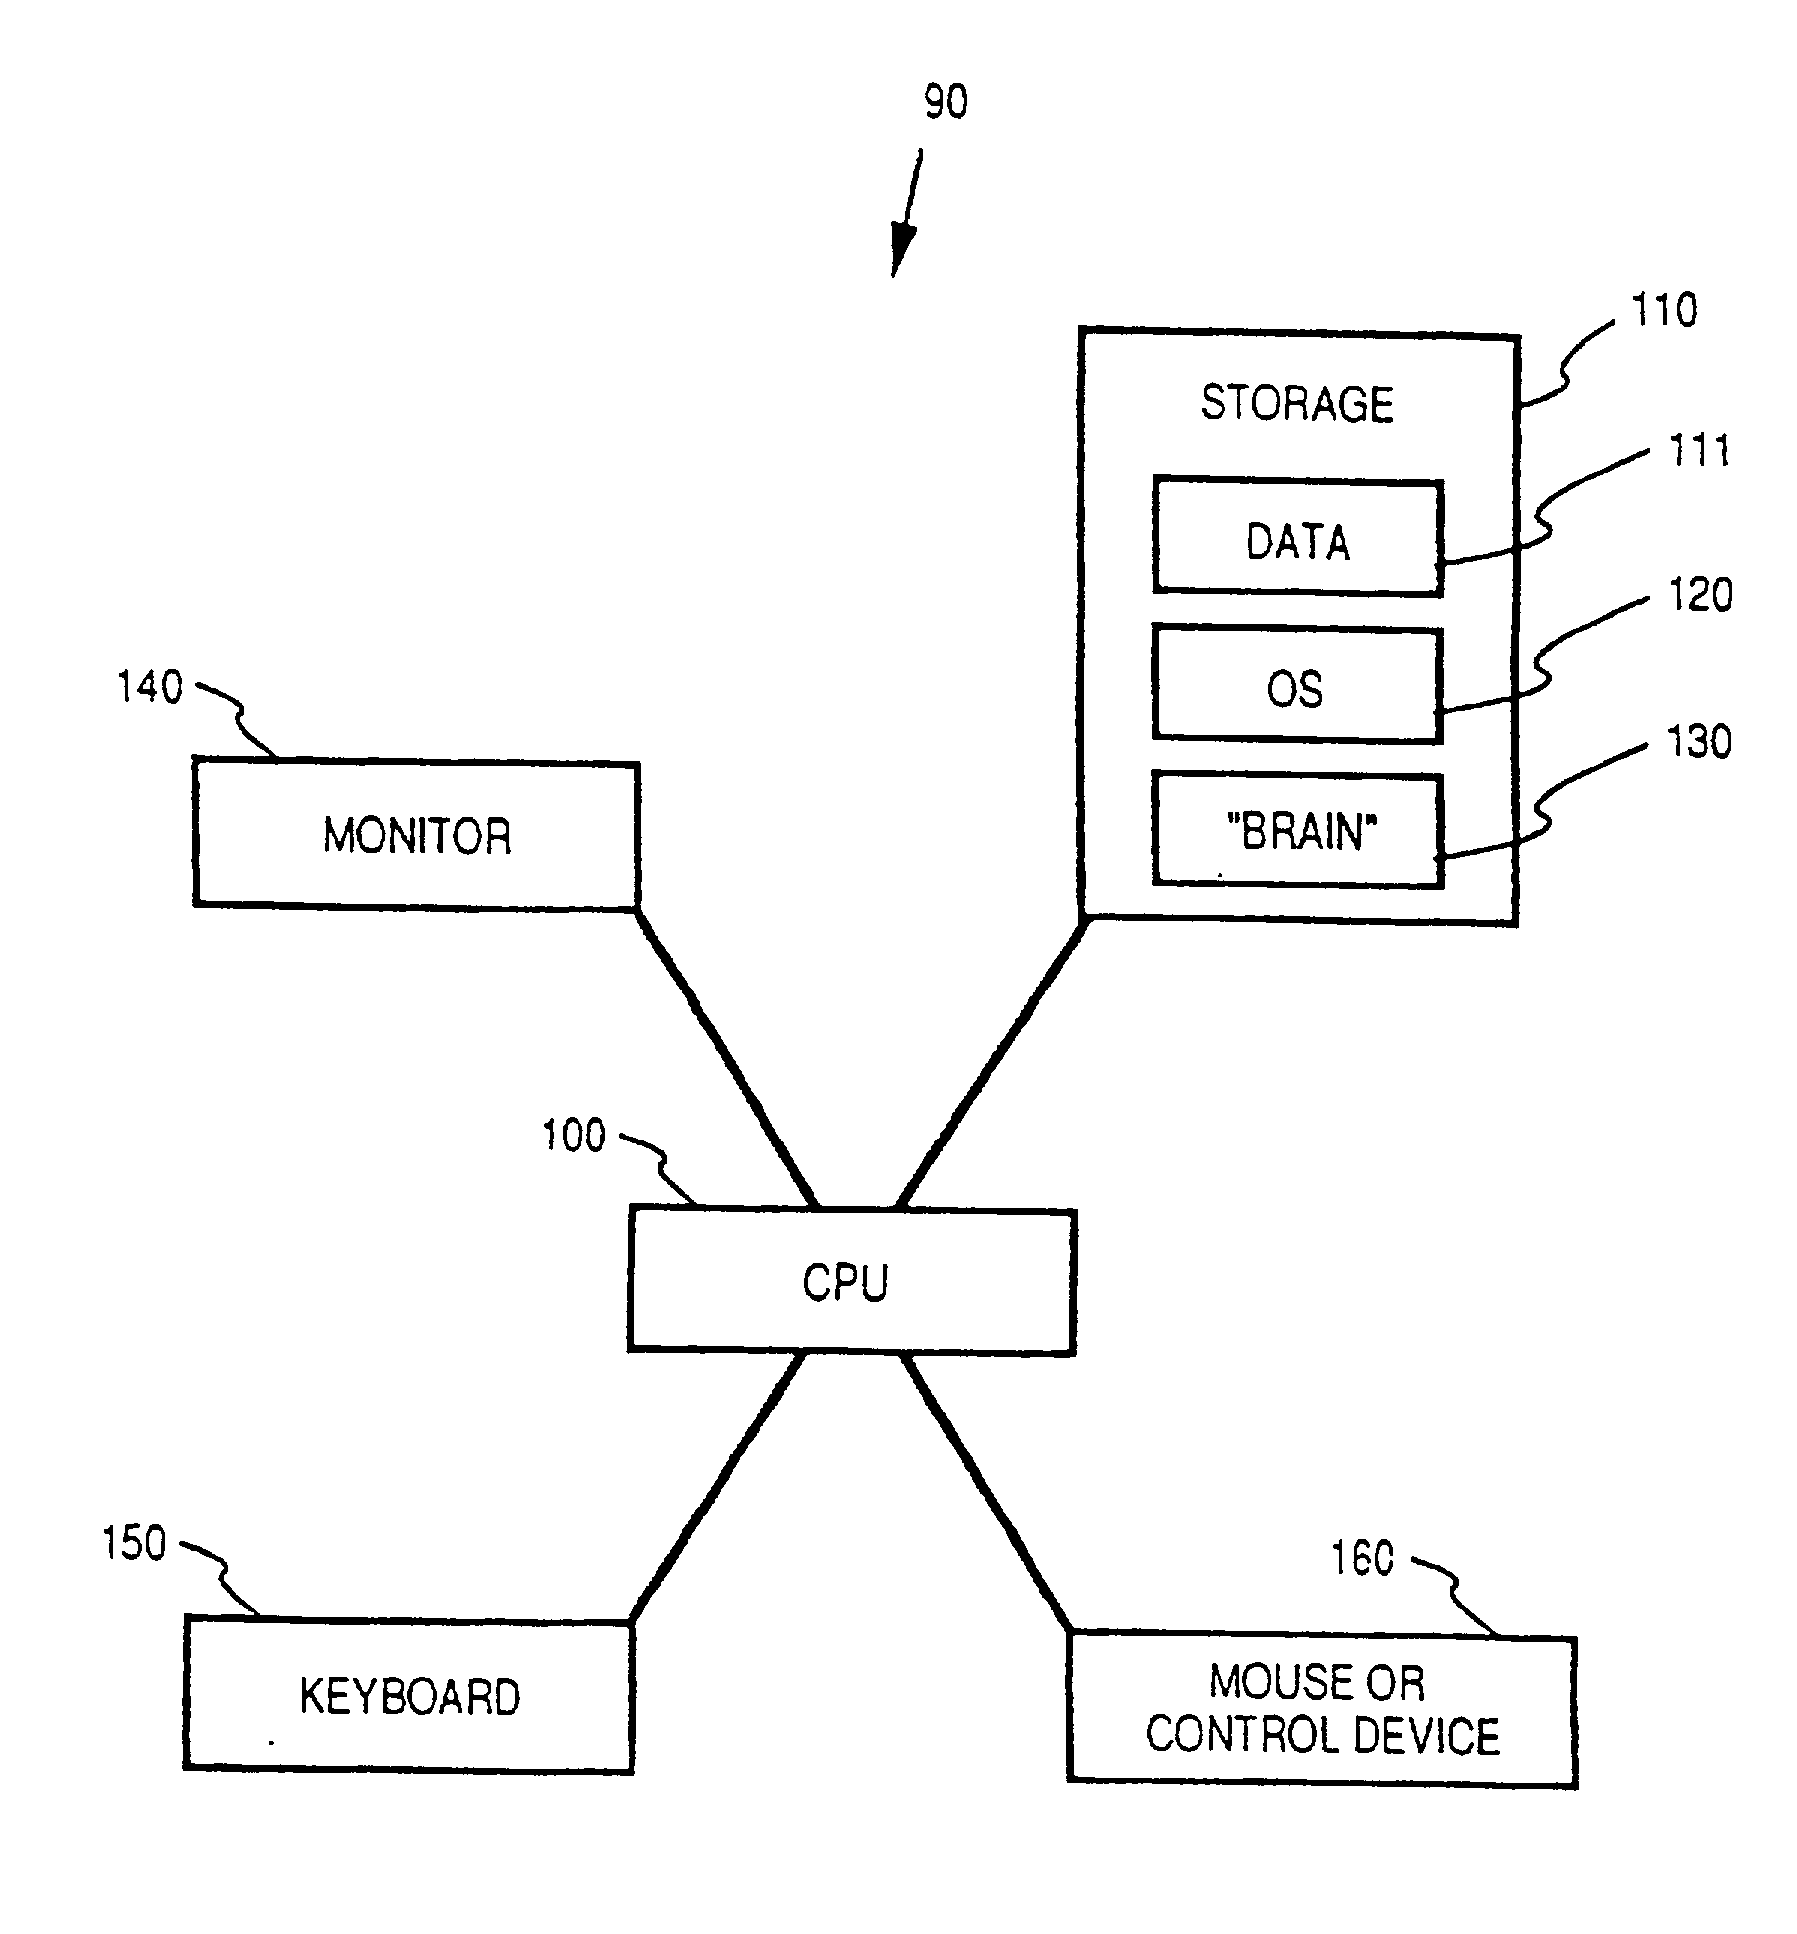 Method and apparatus for creating and accessing associative data structures under a shared model of categories, rules, triggers and data relationship permissions